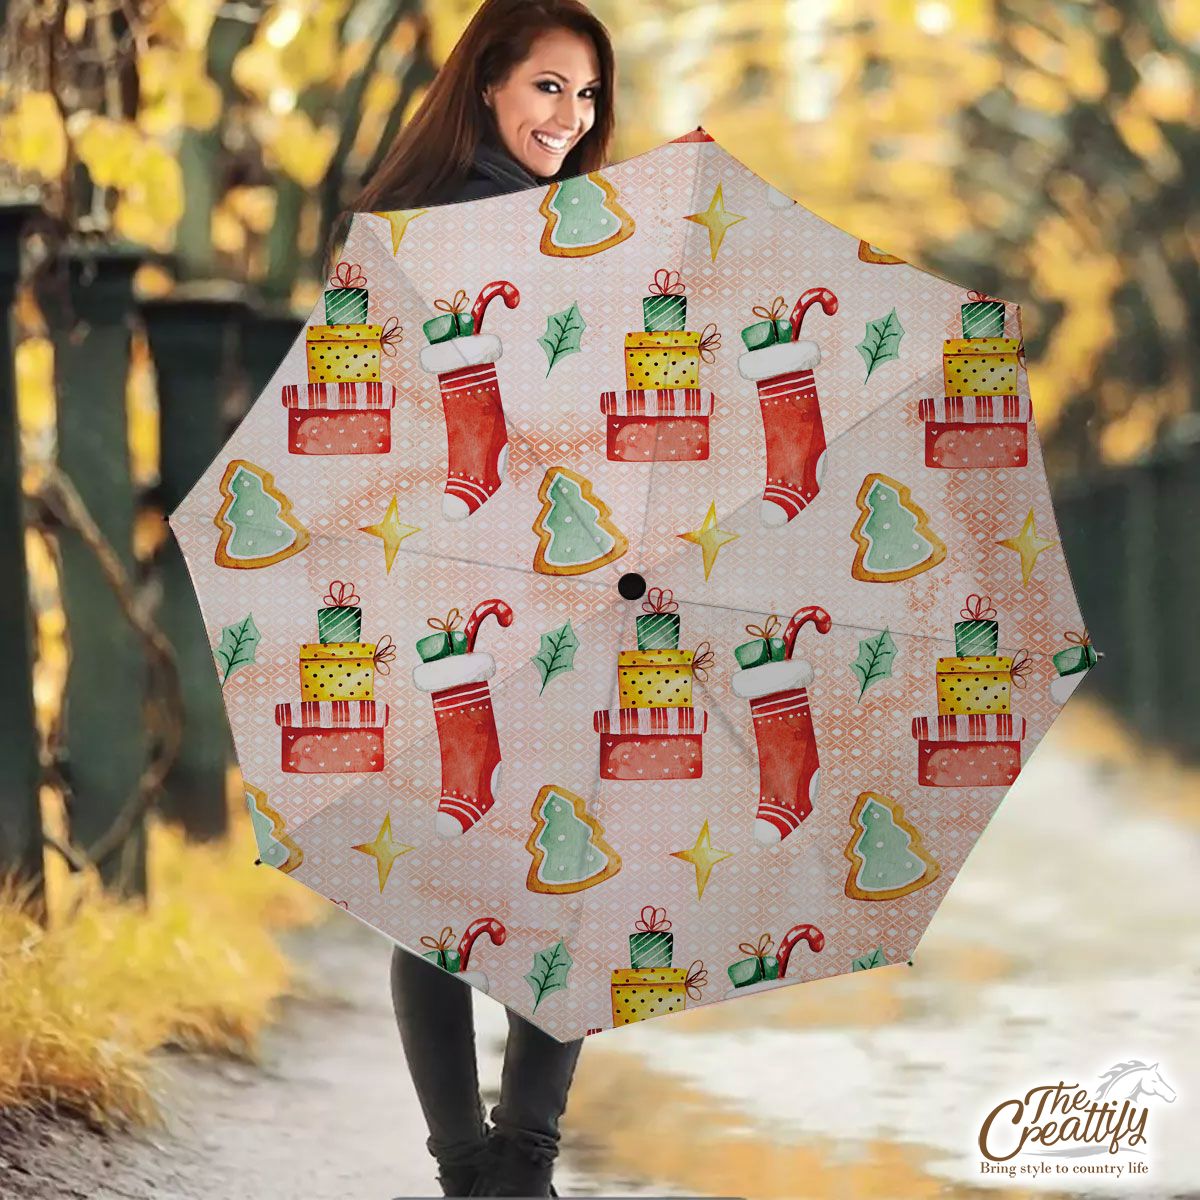 Gingerbread, Christmas Tree, Red Socks With Candy Canes Umbrella